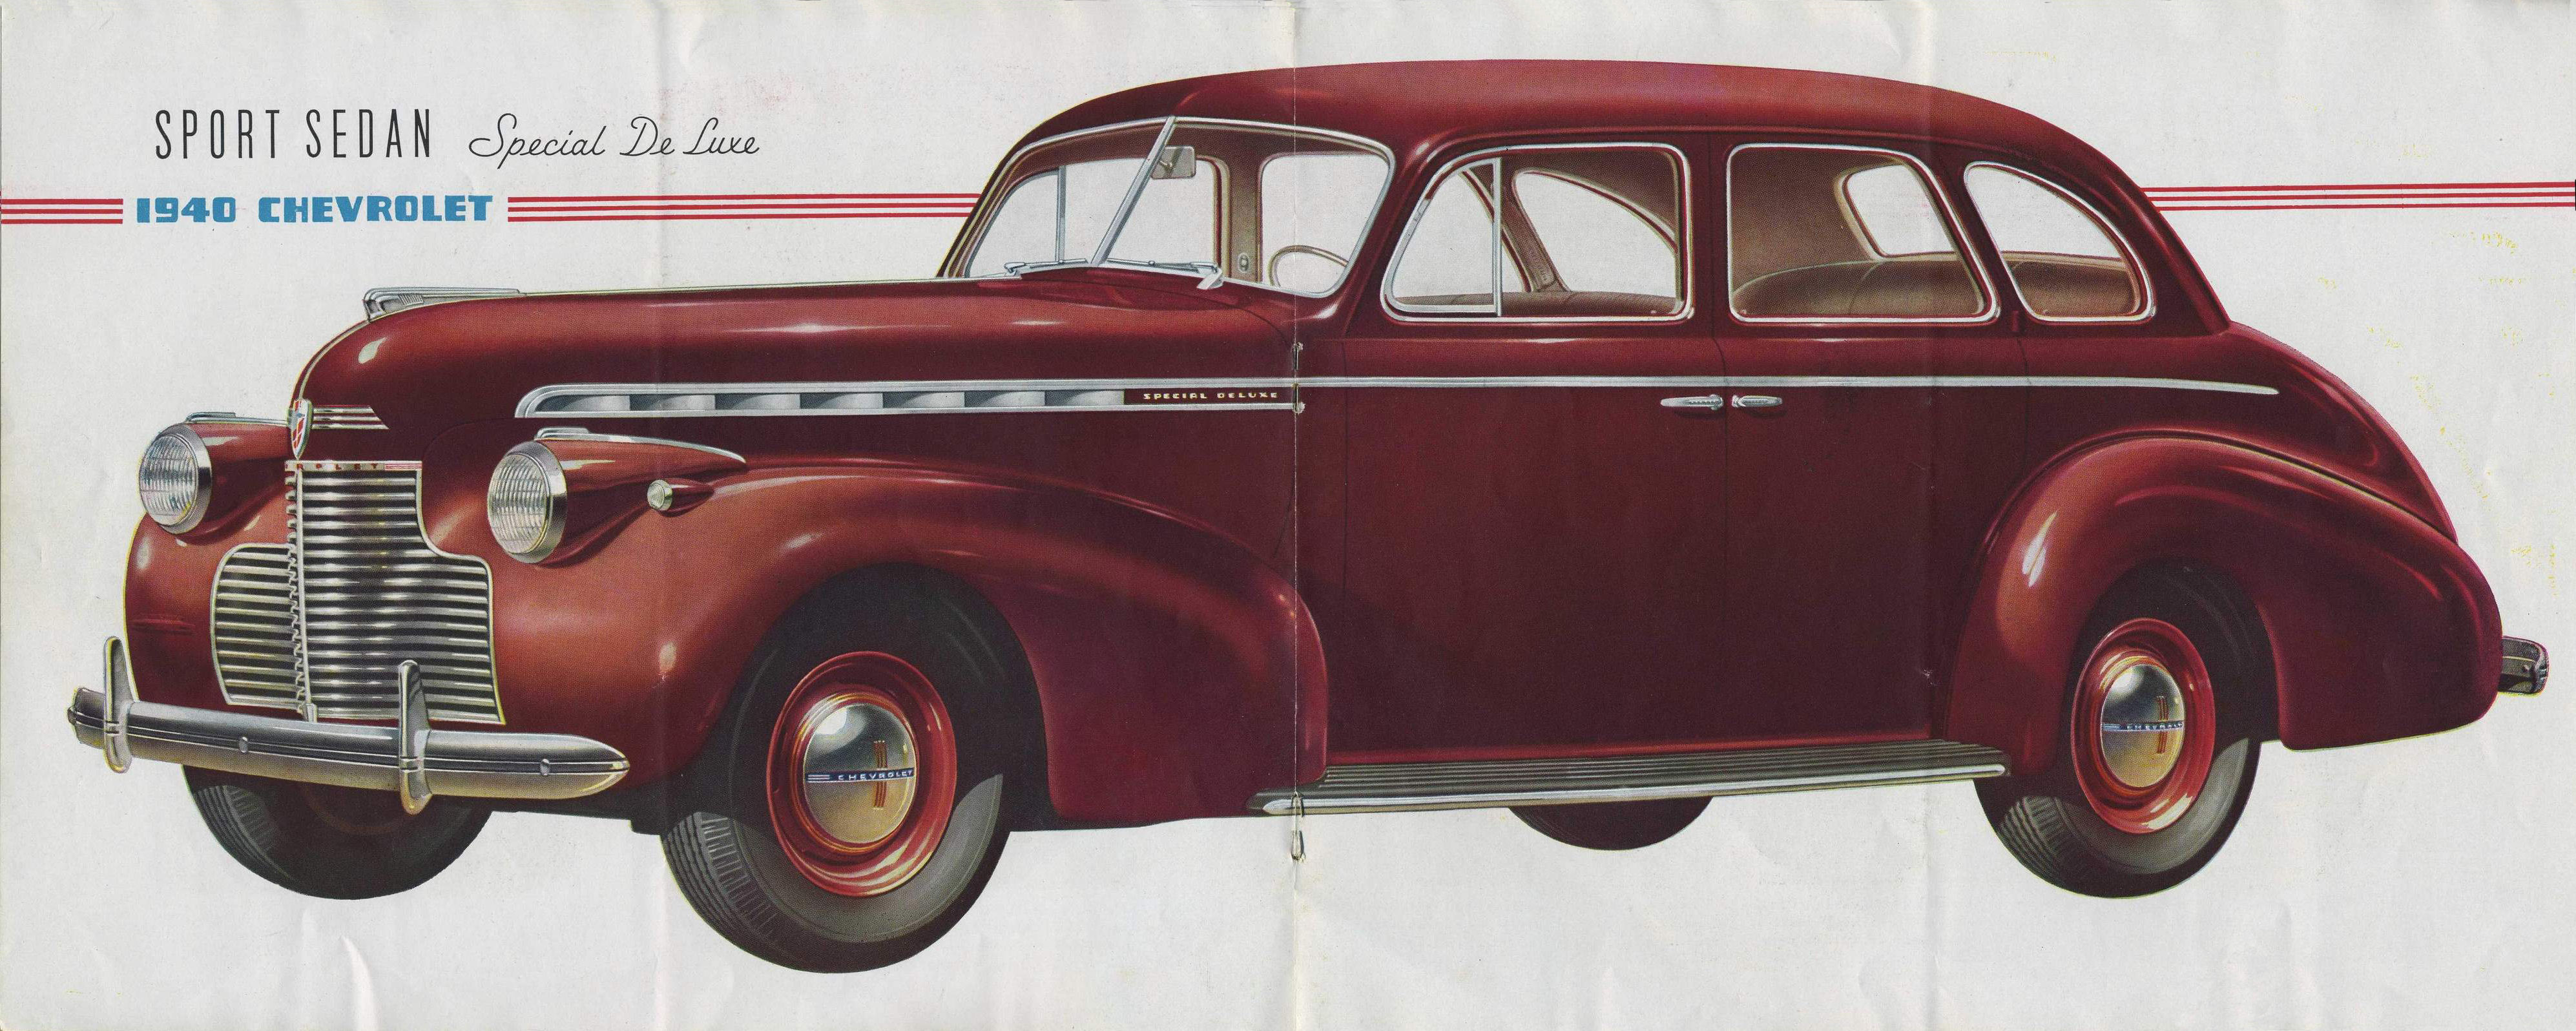 1940 Chevrolet High Quality Background on Wallpapers Vista